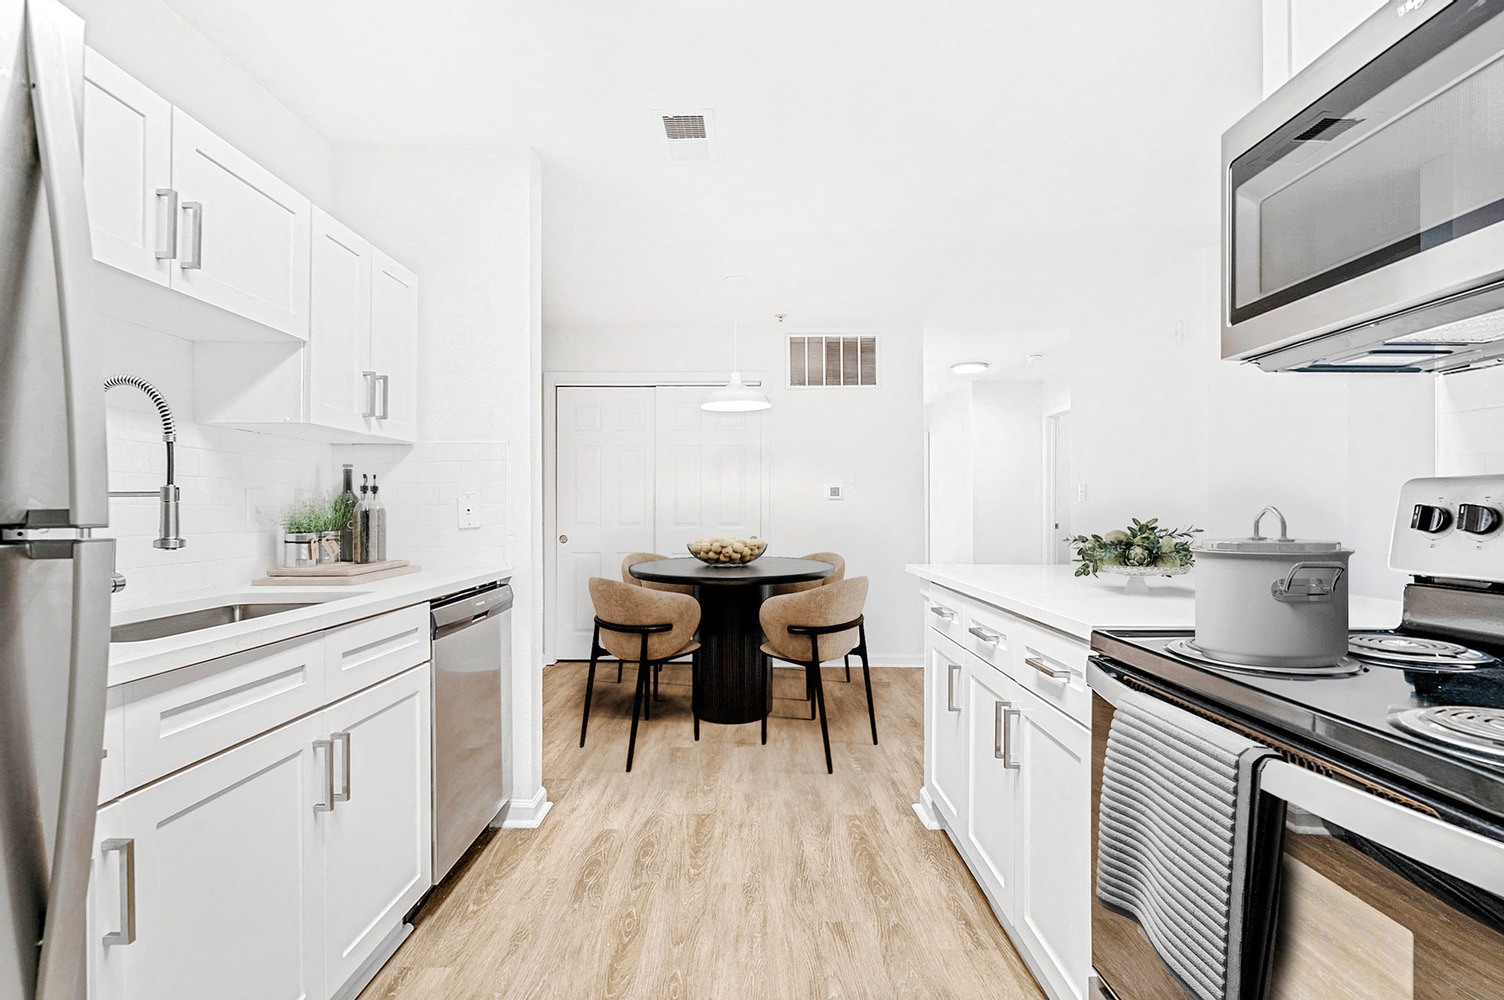 White cabinets, white subway tile back splash and stainless-steel appliances can be seen in the upgraded kitchen. View of dining room with coat closet with sliding doors in the background